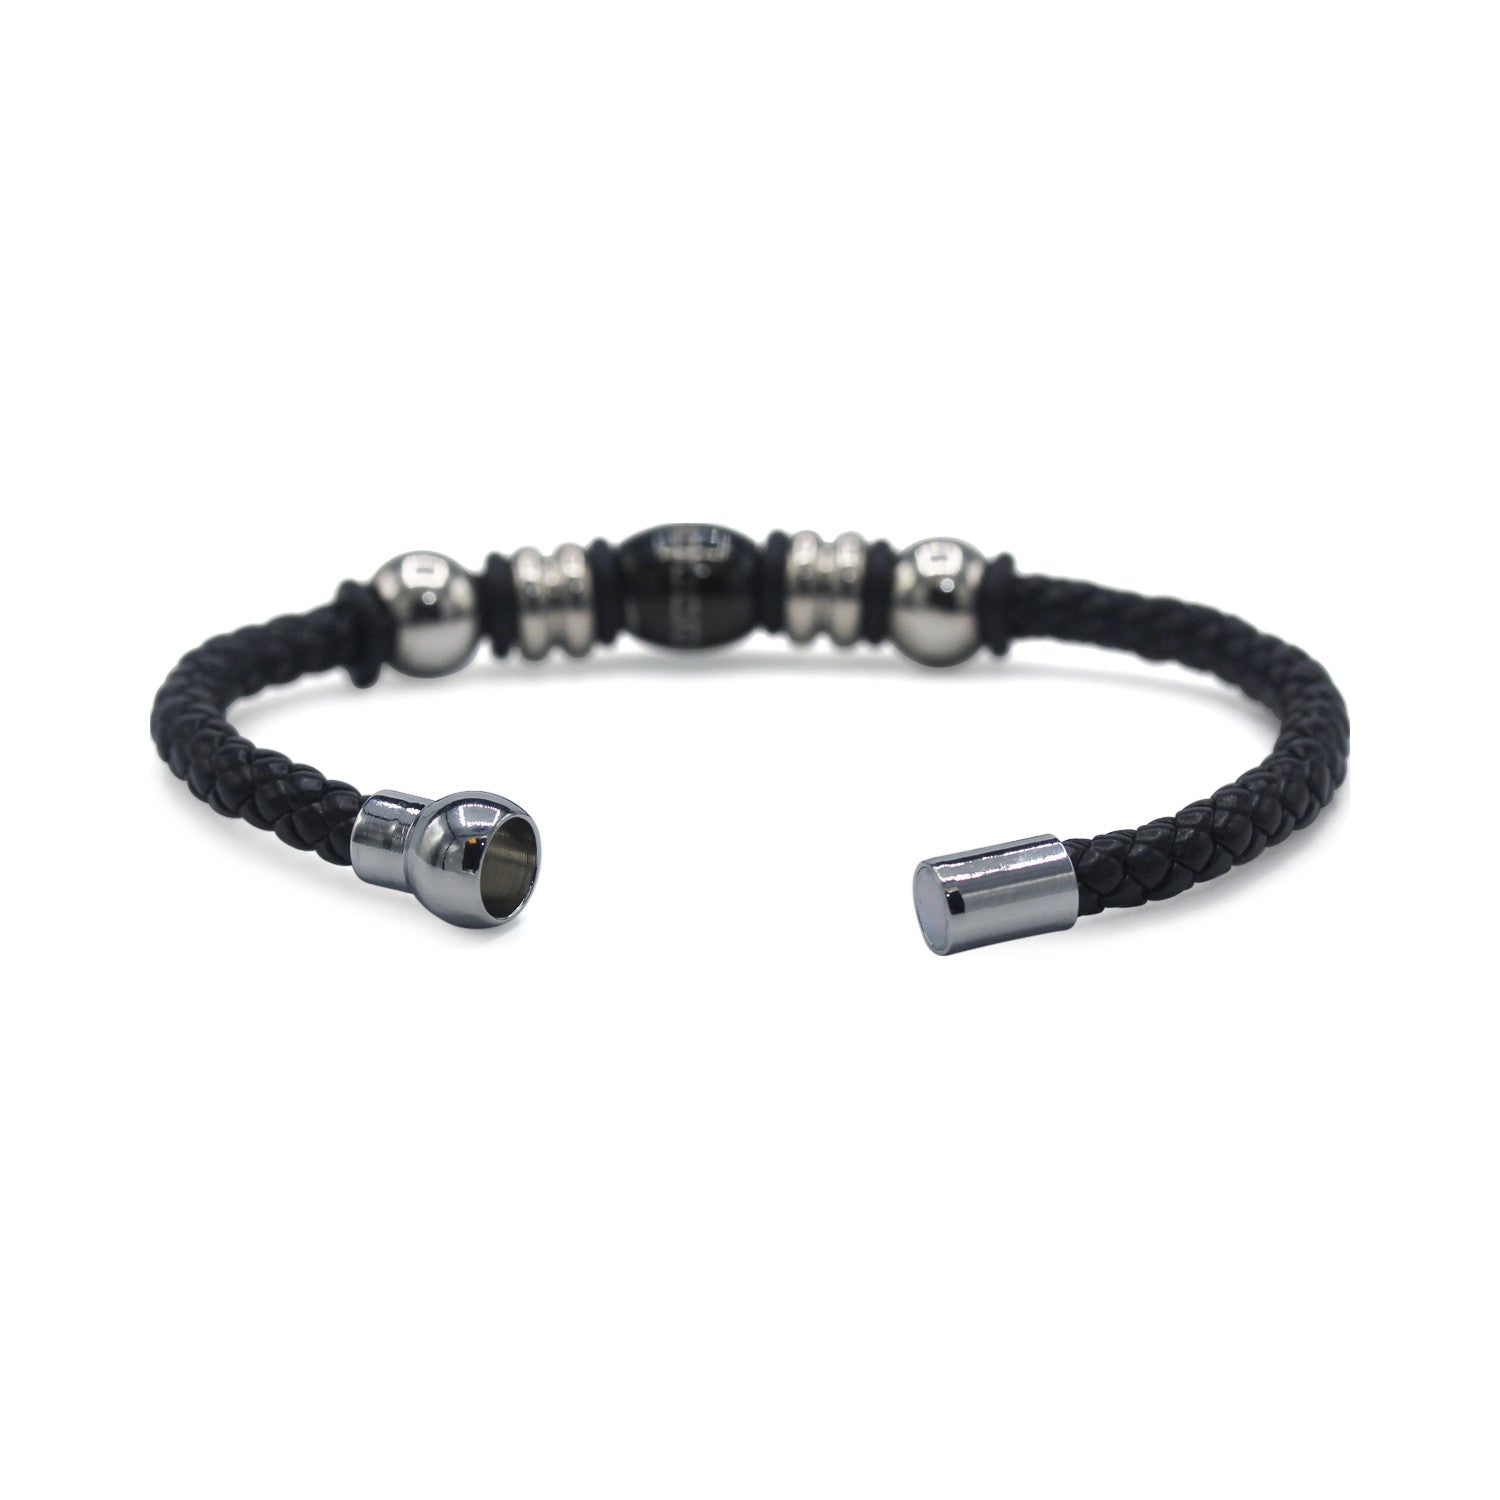 Decorative Leather Bracelet Stainless Steel Accents Magnetic Clasp (Silver/Black)